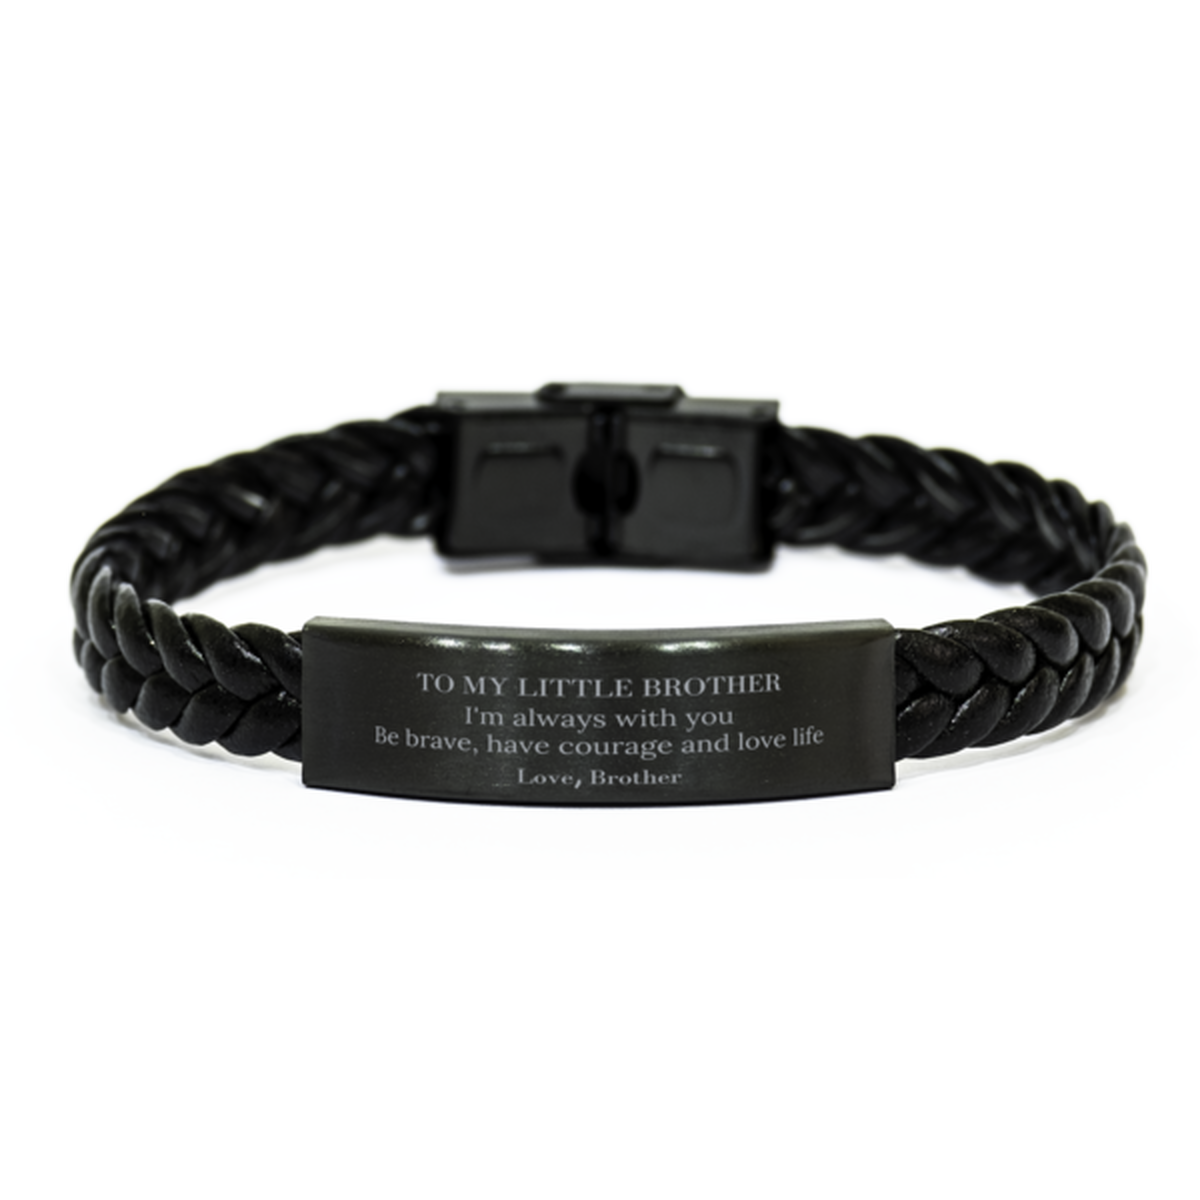 To My Little Brother Gifts from Brother, Unique Braided Leather Bracelet Inspirational Christmas Birthday Graduation Gifts for Little Brother I'm always with you. Be brave, have courage and love life. Love, Brother